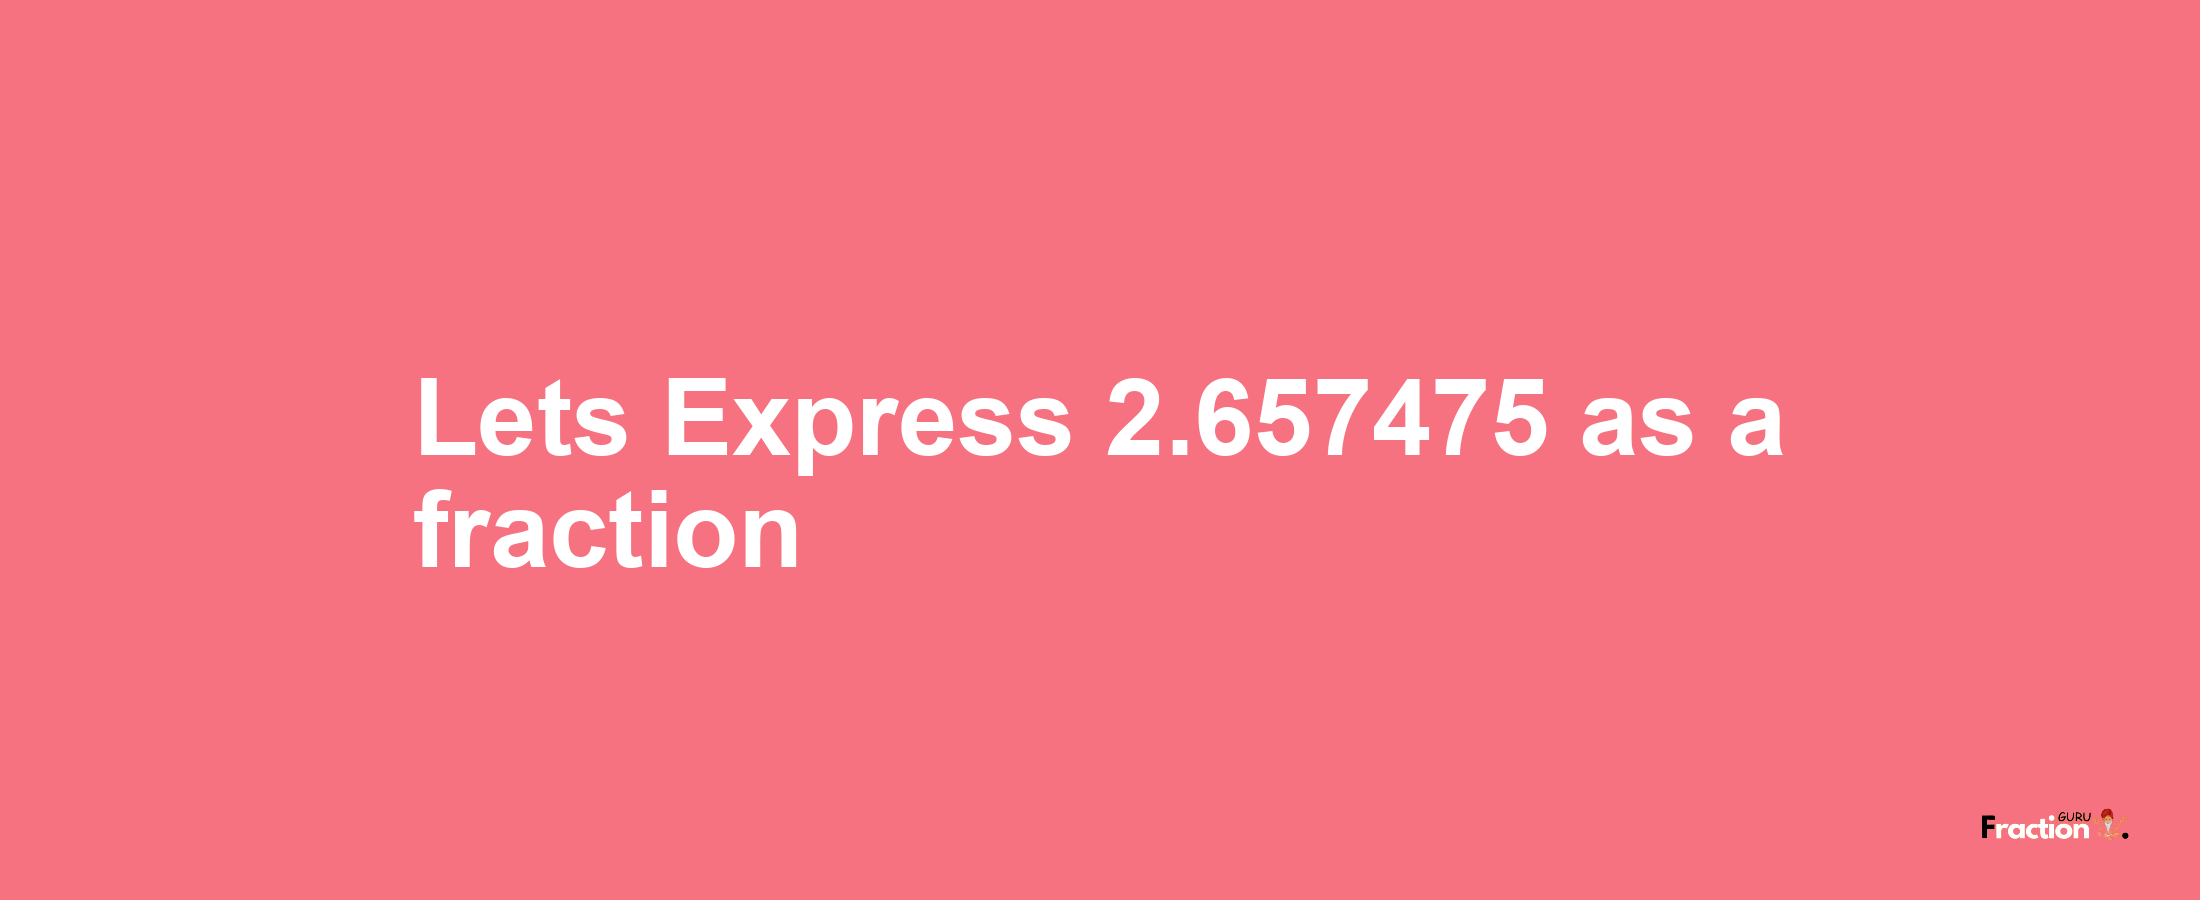 Lets Express 2.657475 as afraction